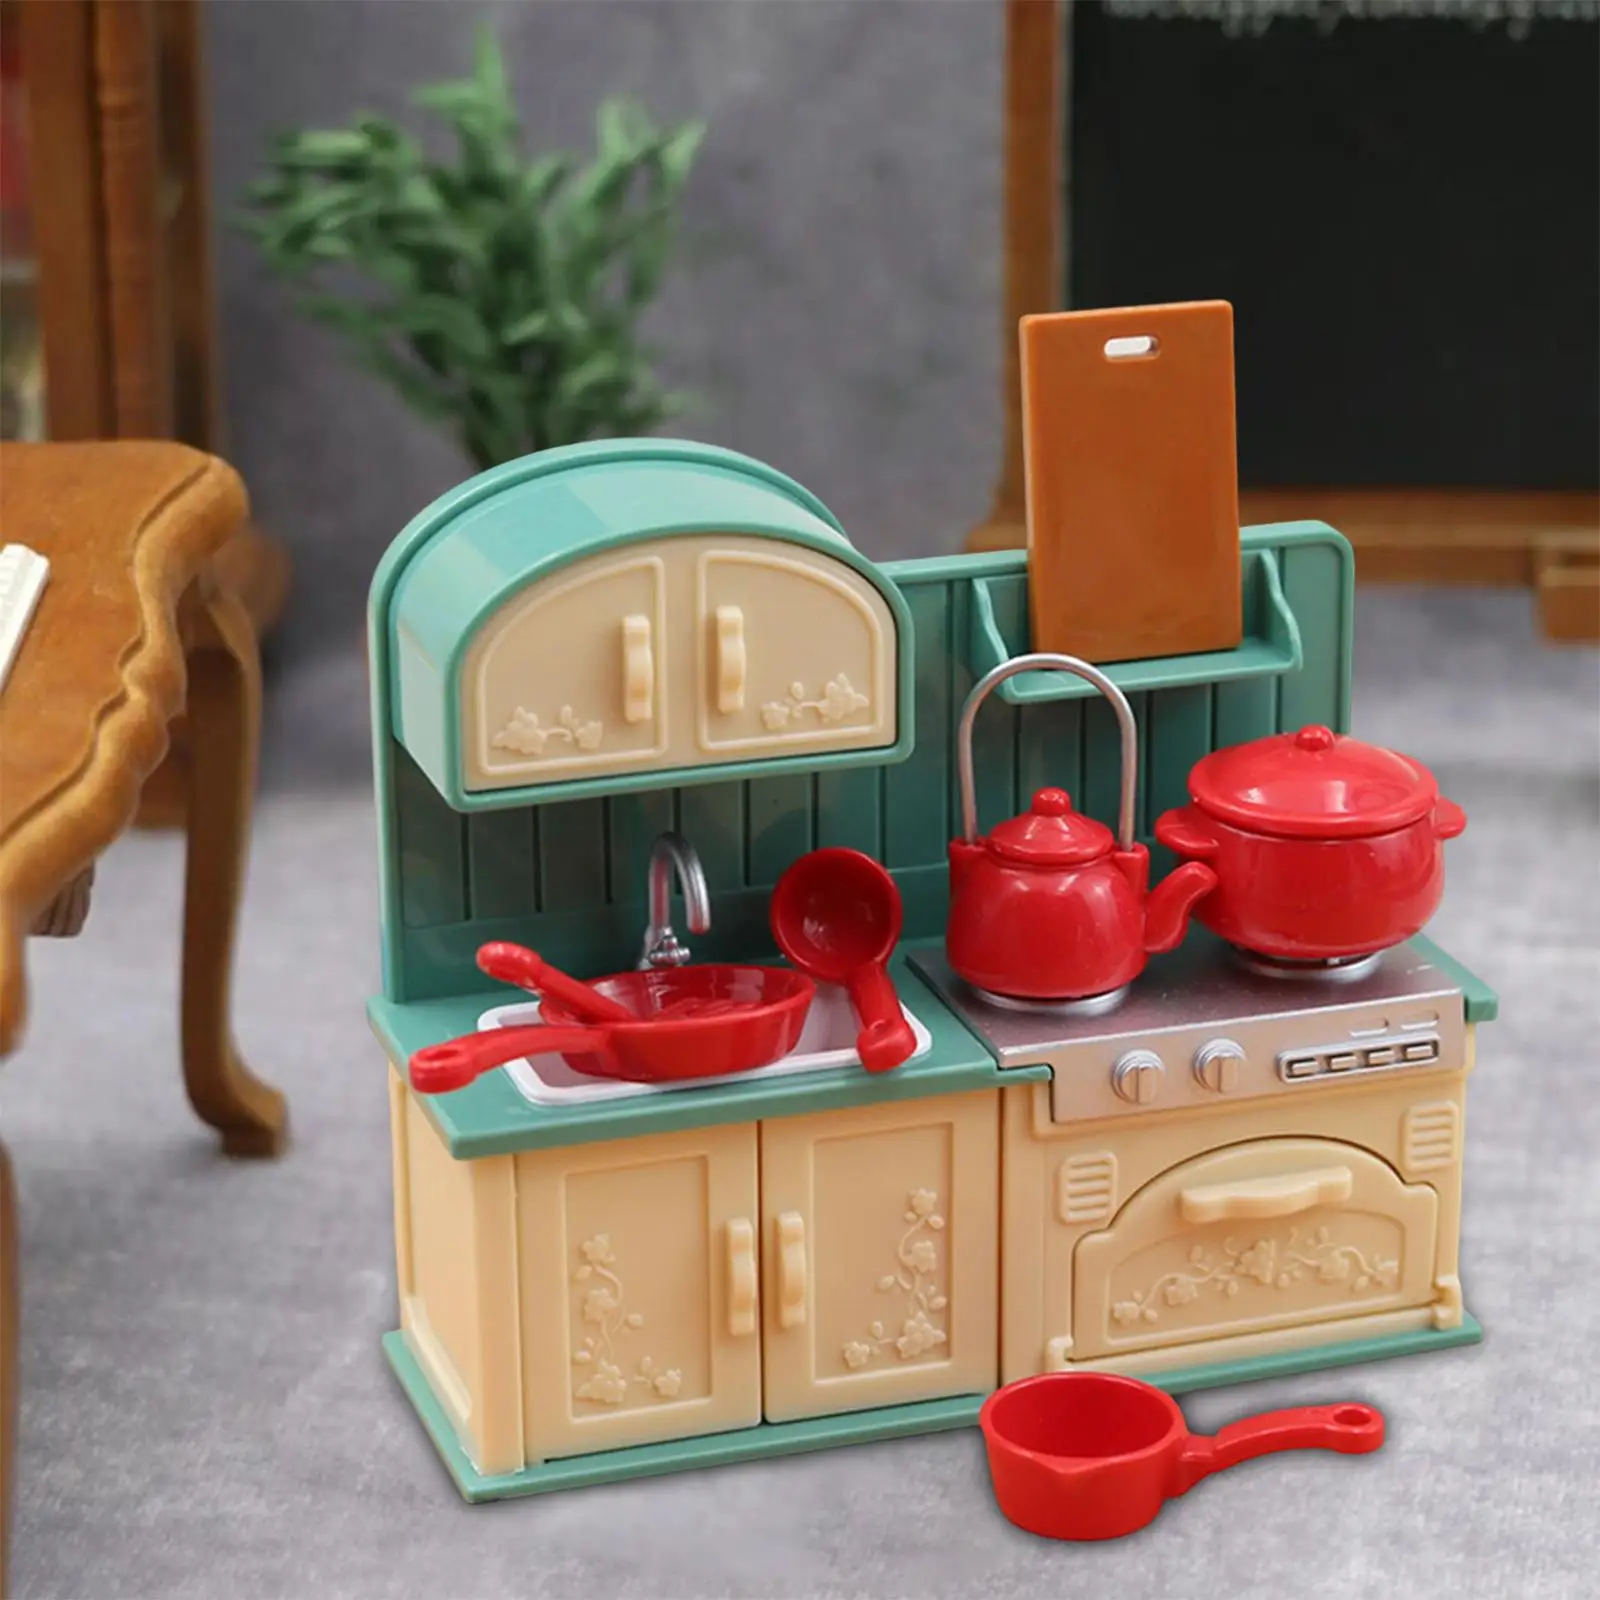 1/18 Scale Dollhouse Play Set Miniature Doll House Furniture Toys Pretend Play Accessories with Food Pots for Kids Boys Gifts